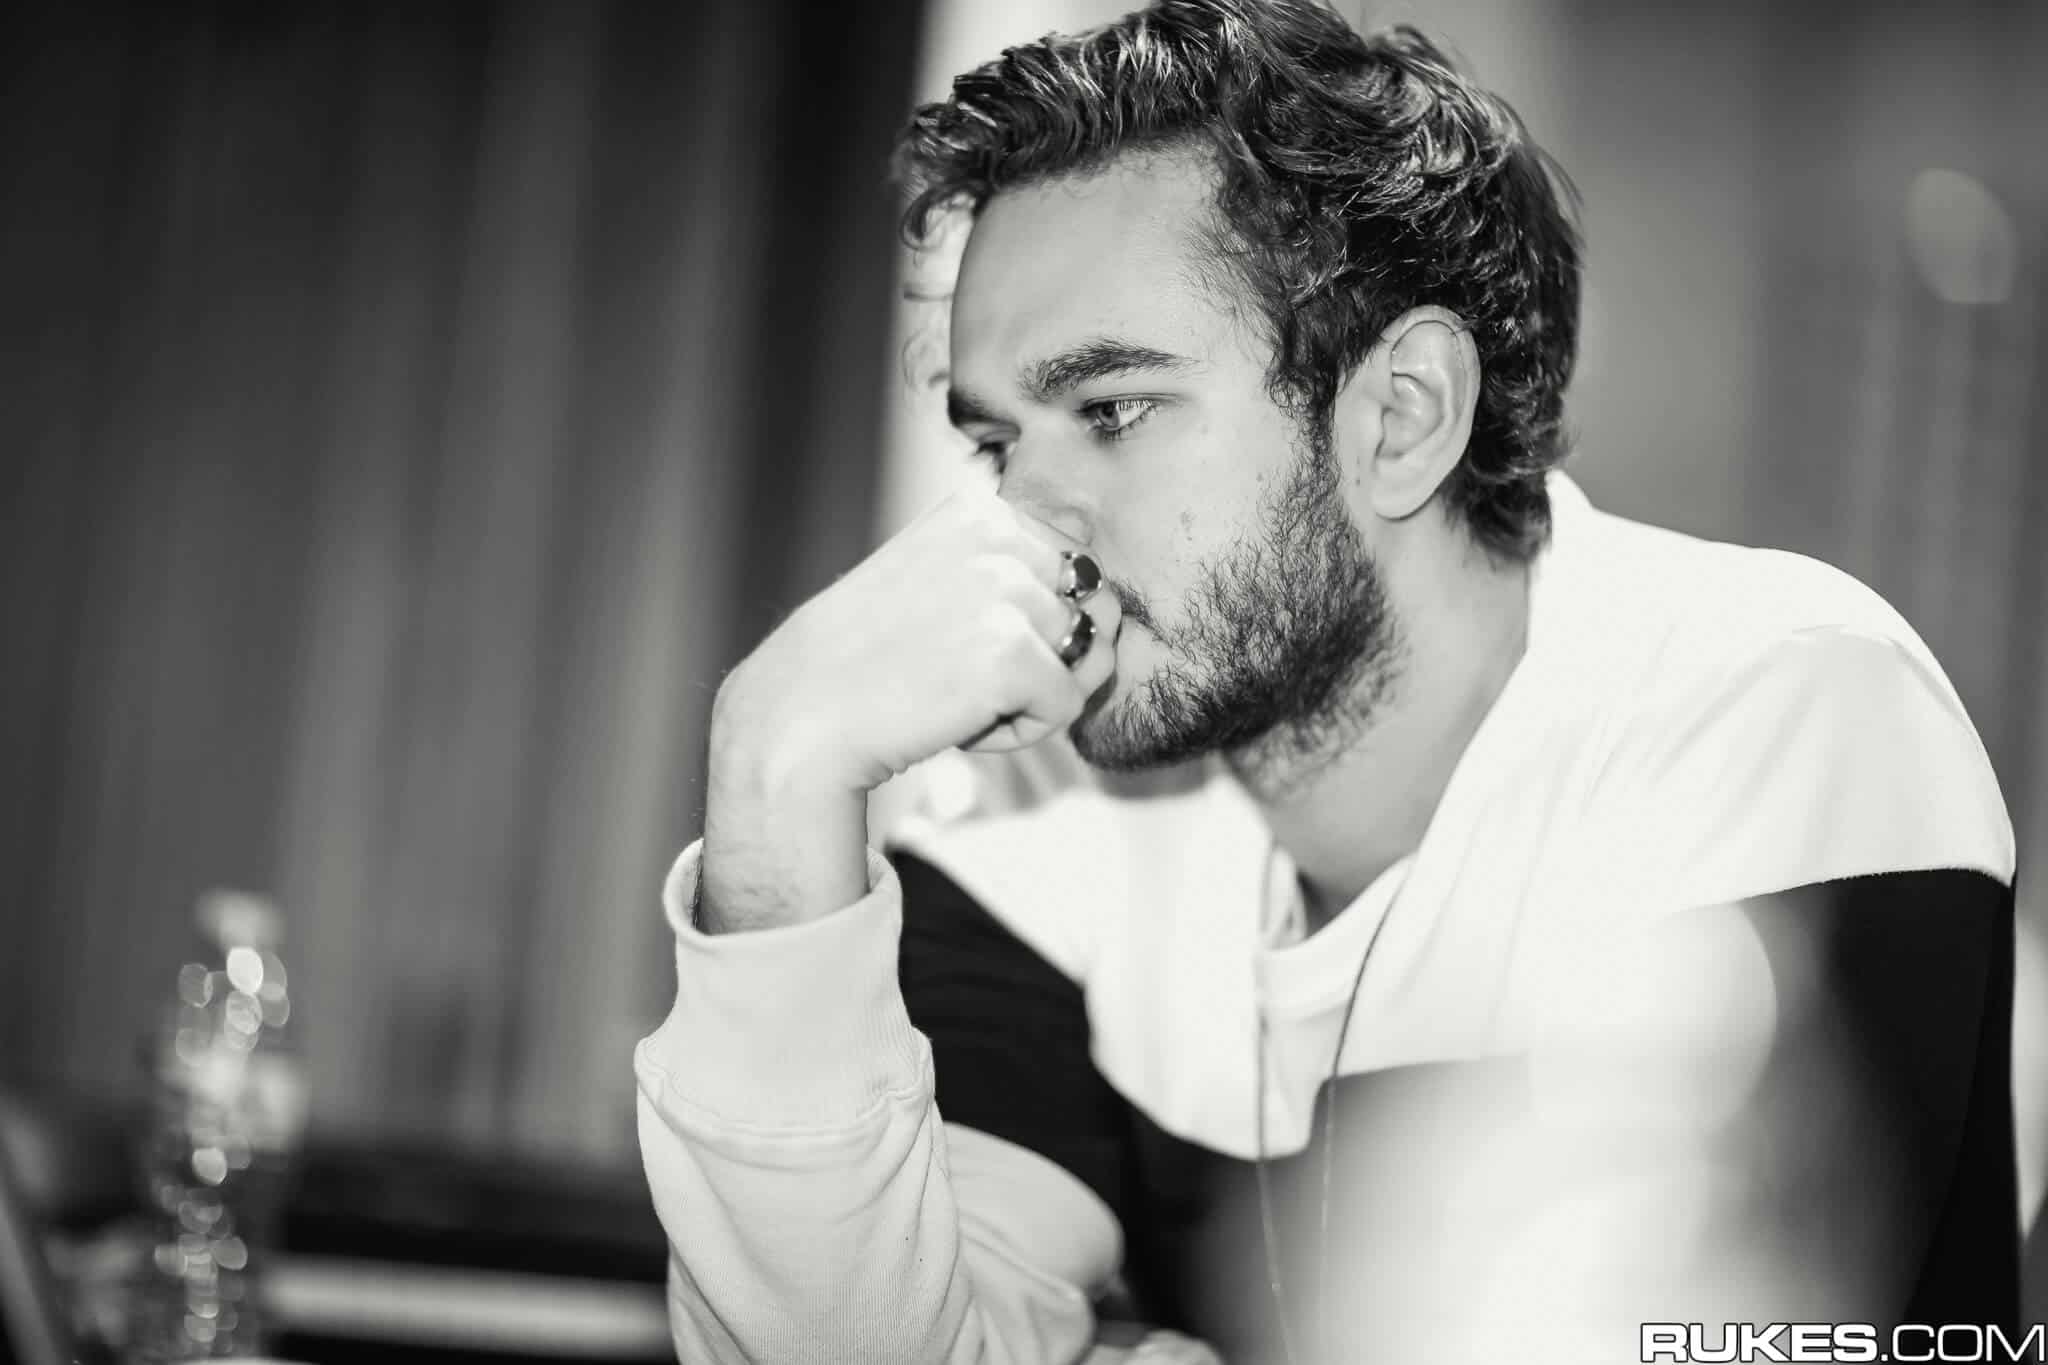 Zedd records 1 billion plays on Spotify with his hit ‘The Middle’